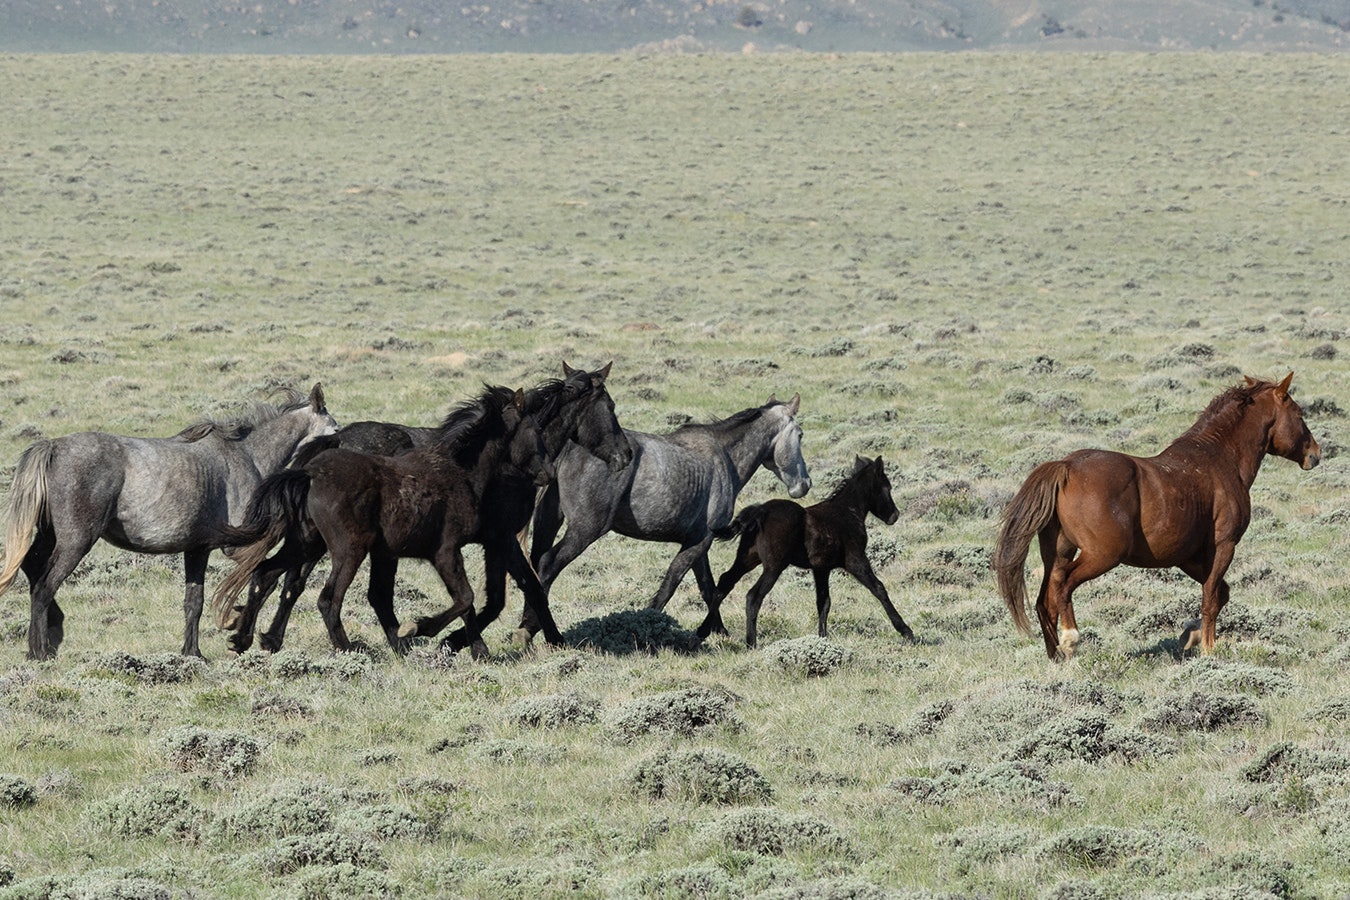 This small band of mustangs are one of numerous such “family groups” that live on the open range in central Wyoming.